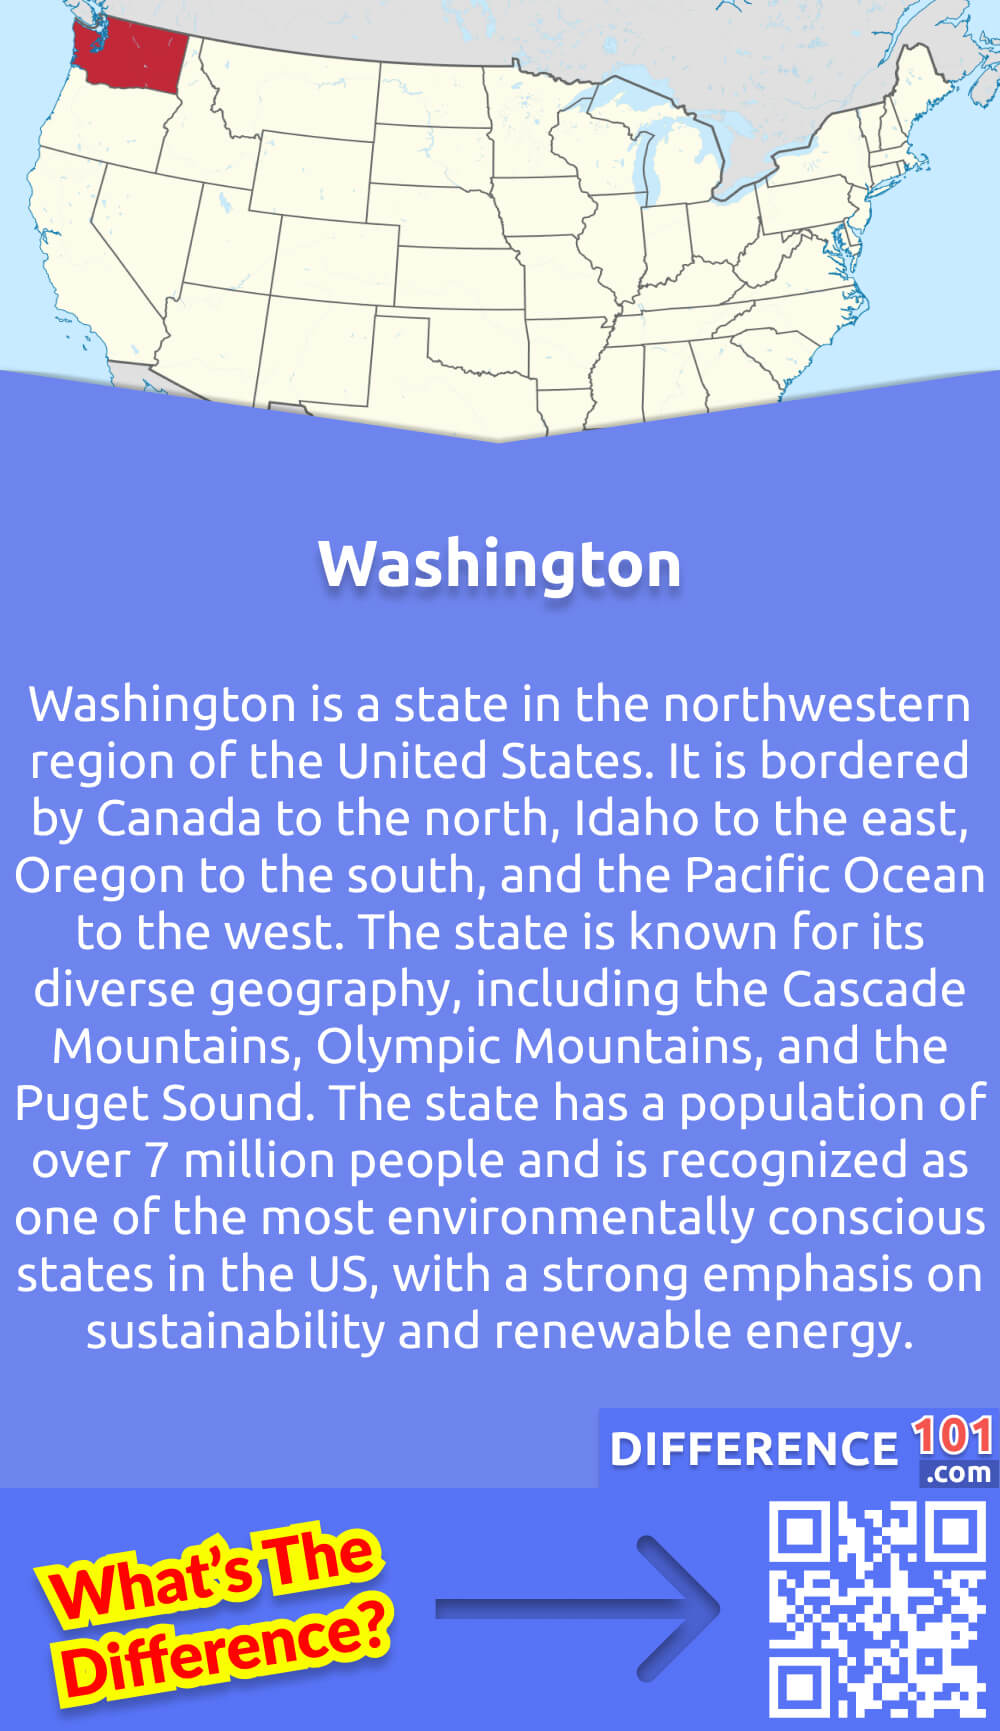 What Is Washington? Washington is a state in the northwestern region of the United States. It is bordered by Canada to the north, Idaho to the east, Oregon to the south, and the Pacific Ocean to the west. The state is known for its diverse geography, including the Cascade Mountains, Olympic Mountains, and the Puget Sound. Washington is also home to the city of Seattle, which is known for its thriving tech industry and iconic landmarks such as the Space Needle. The state has a population of over 7 million people and is recognized as one of the most environmentally conscious states in the US, with a strong emphasis on sustainability and renewable energy.